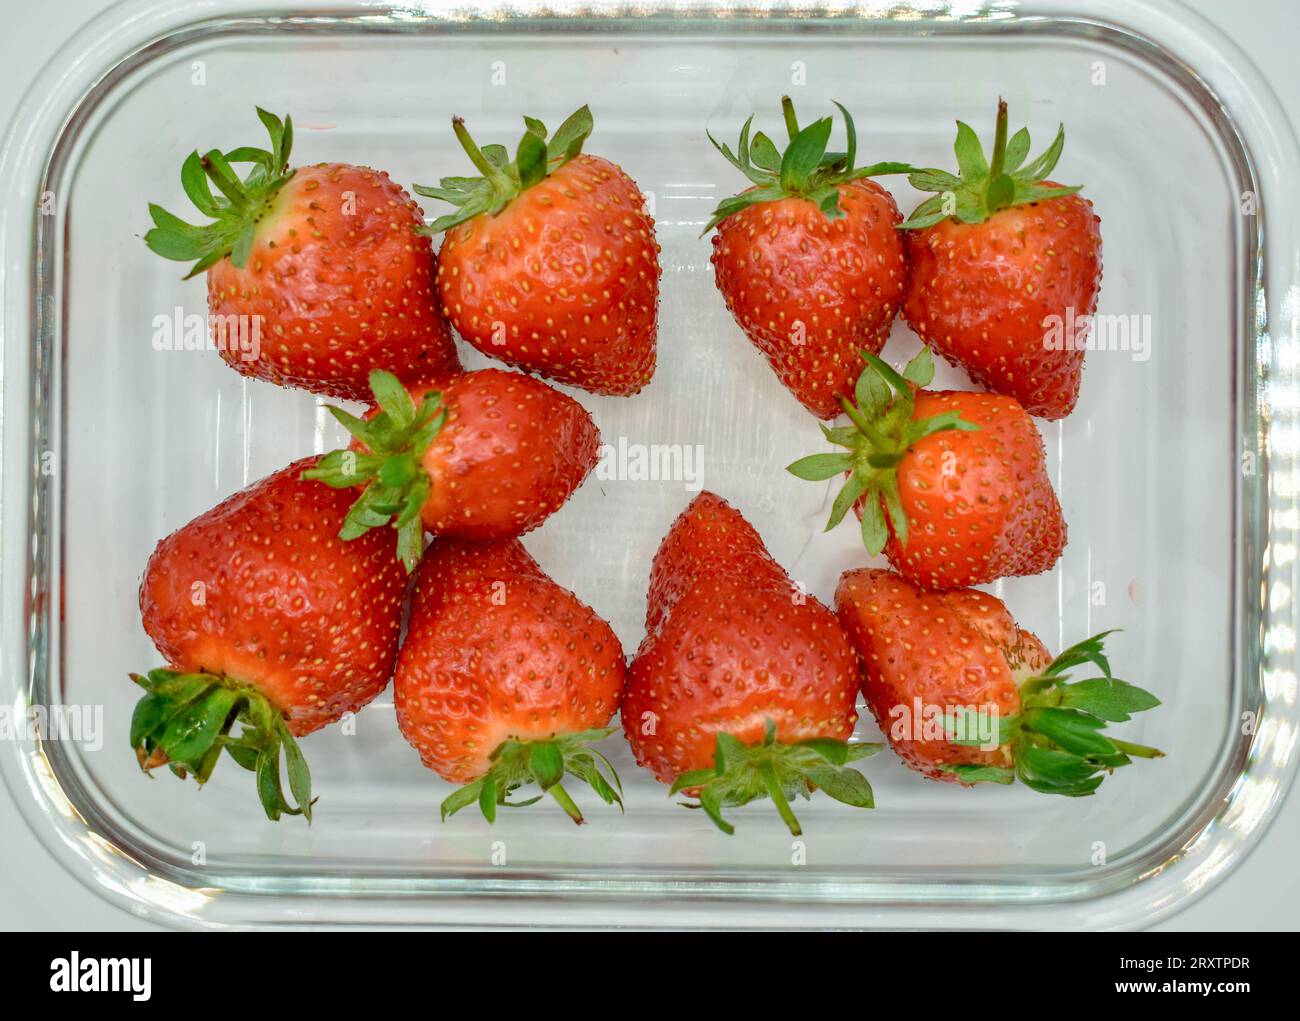 A clear glass dish containing some juicy red strawberries photographed against a white background. Stock Photo